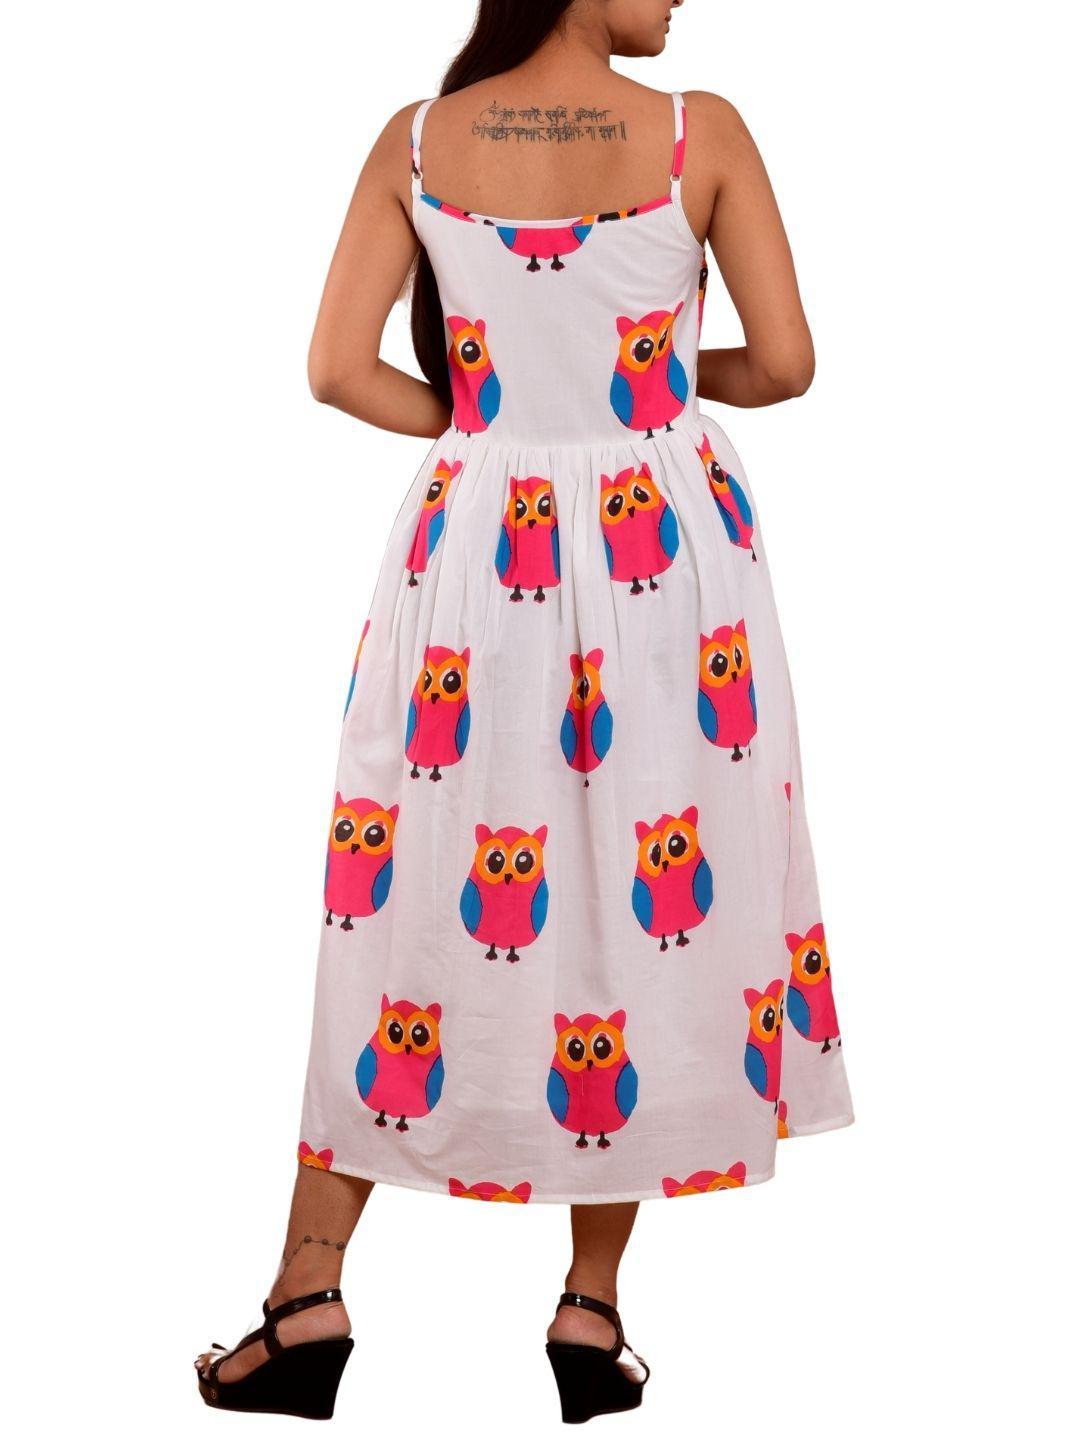 cotton-owl-print-dress-10904004WH, Women Clothing, Cotton Dress, Cotton Owl Print Hem Shoulder Straps Sleeveless Dress with Lining